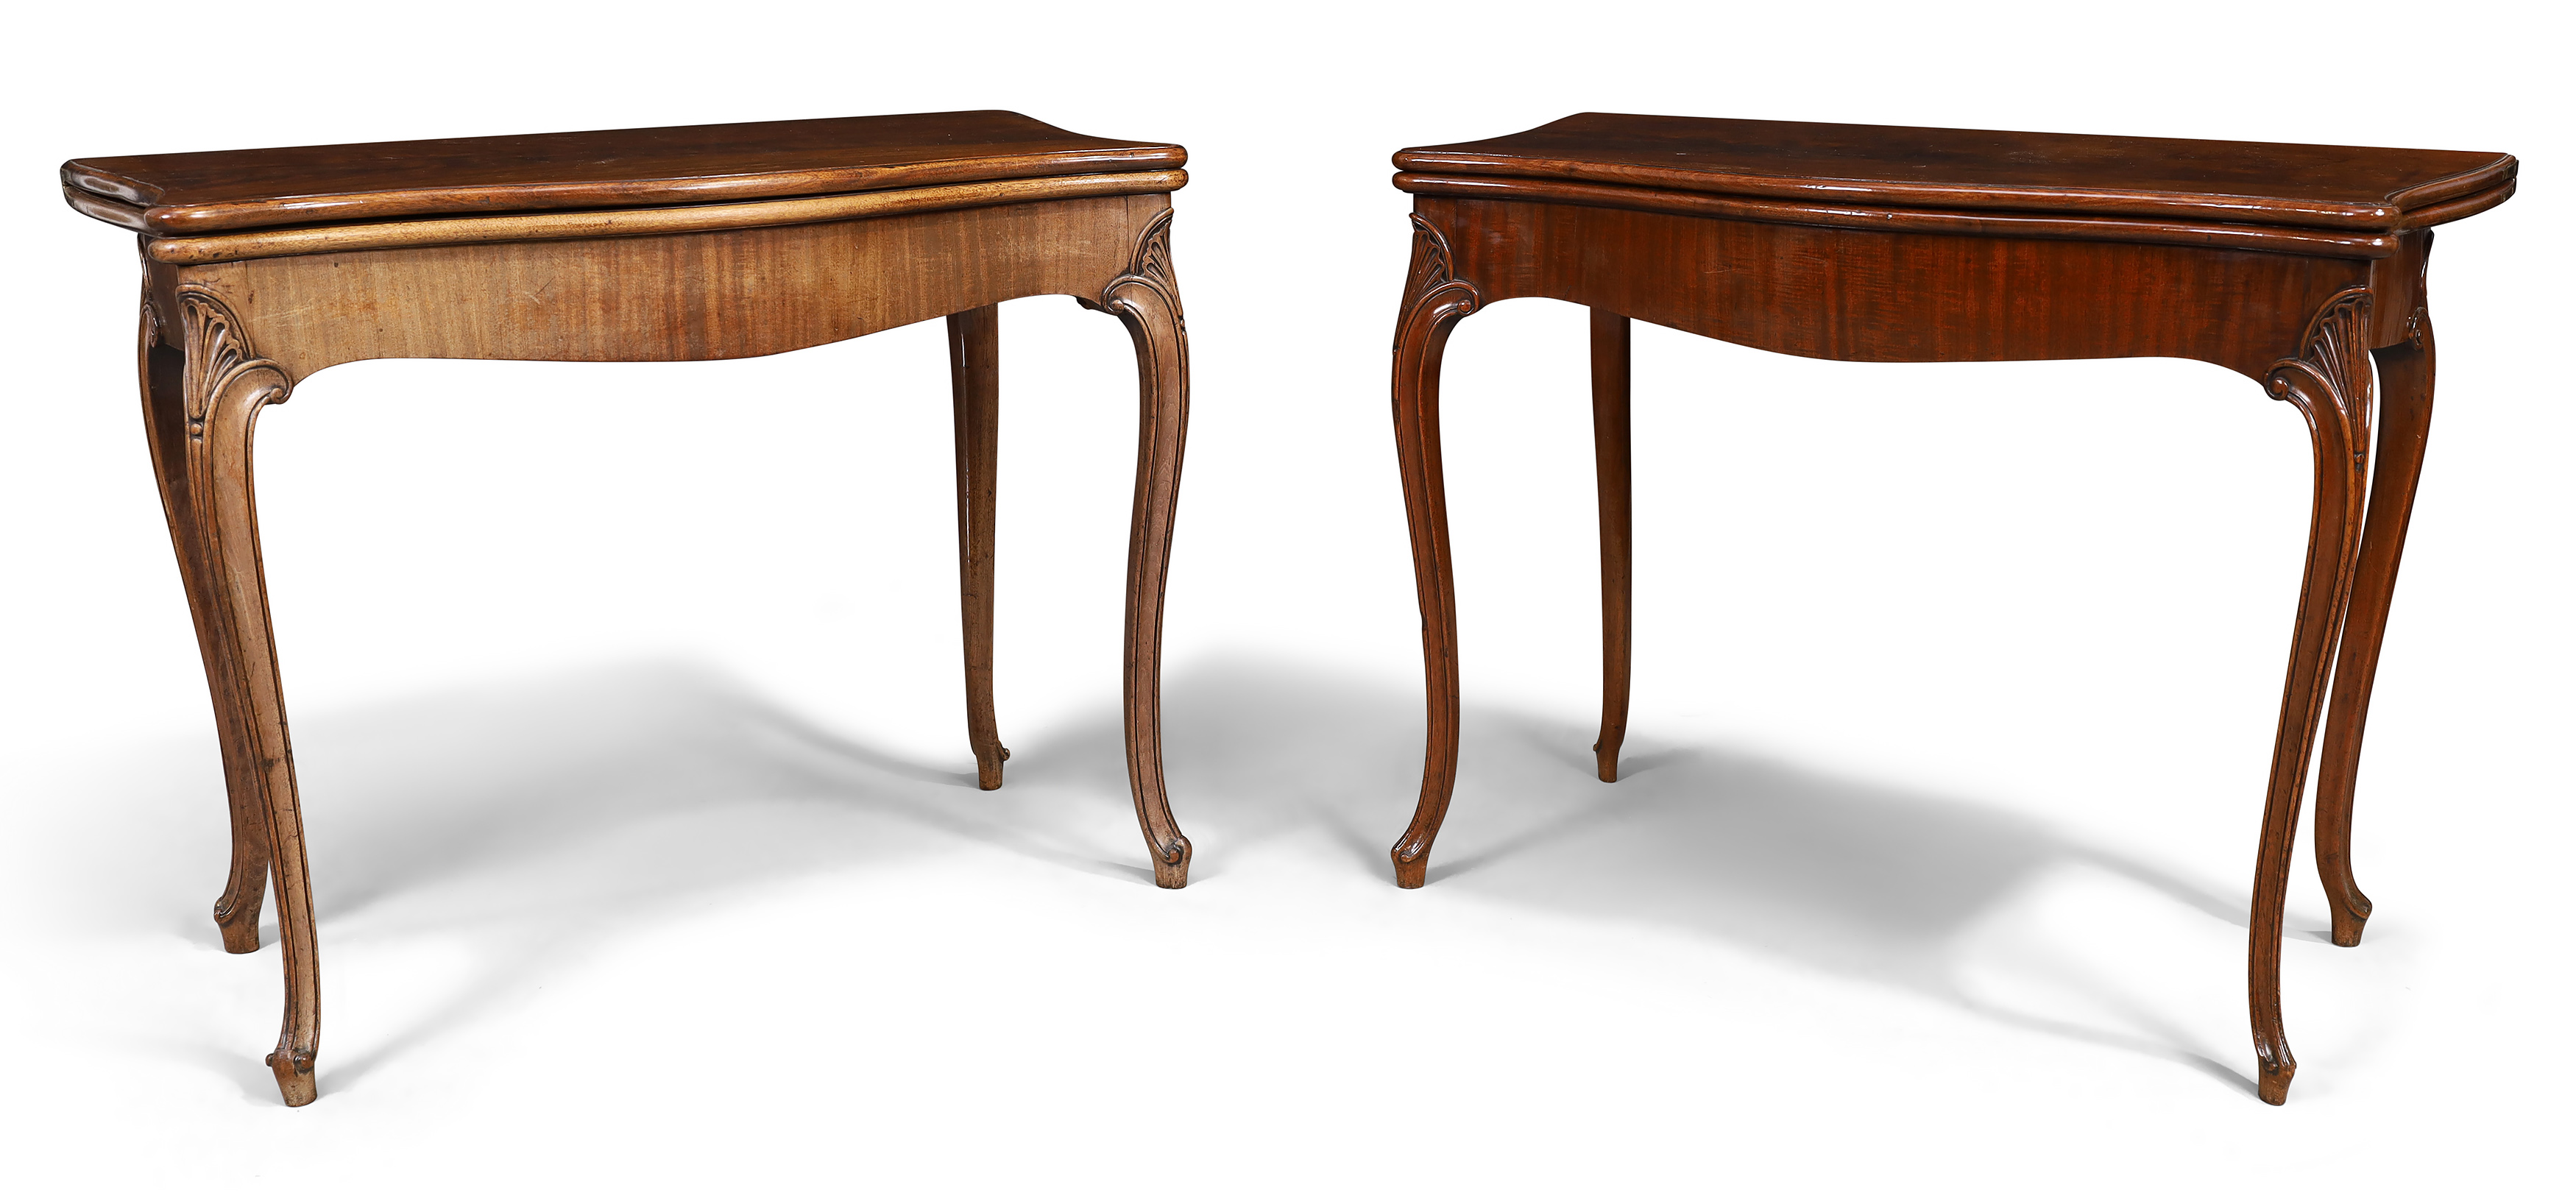 A near pair of George III mahogany serpentine concertina action tea tables, third quarter 18th ce... - Image 3 of 5